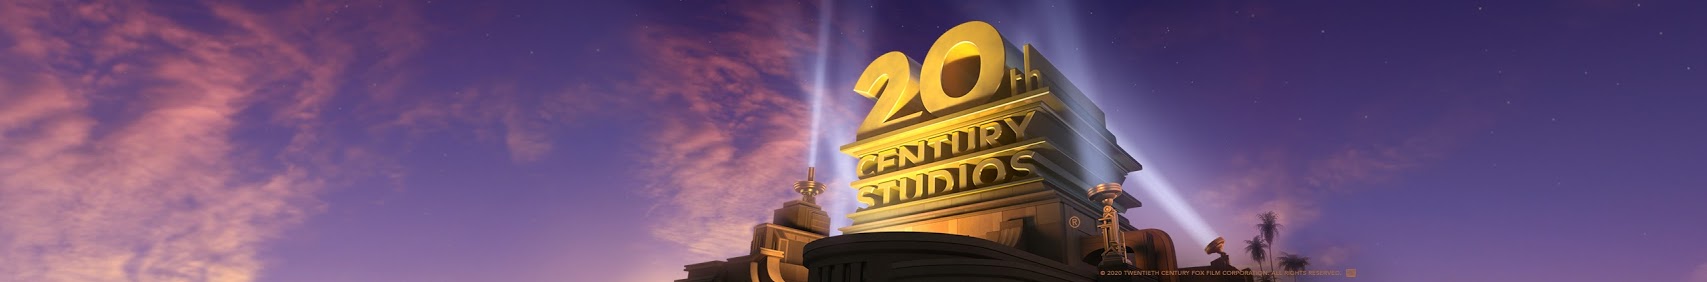 20th Century Studios YouTube channel banner